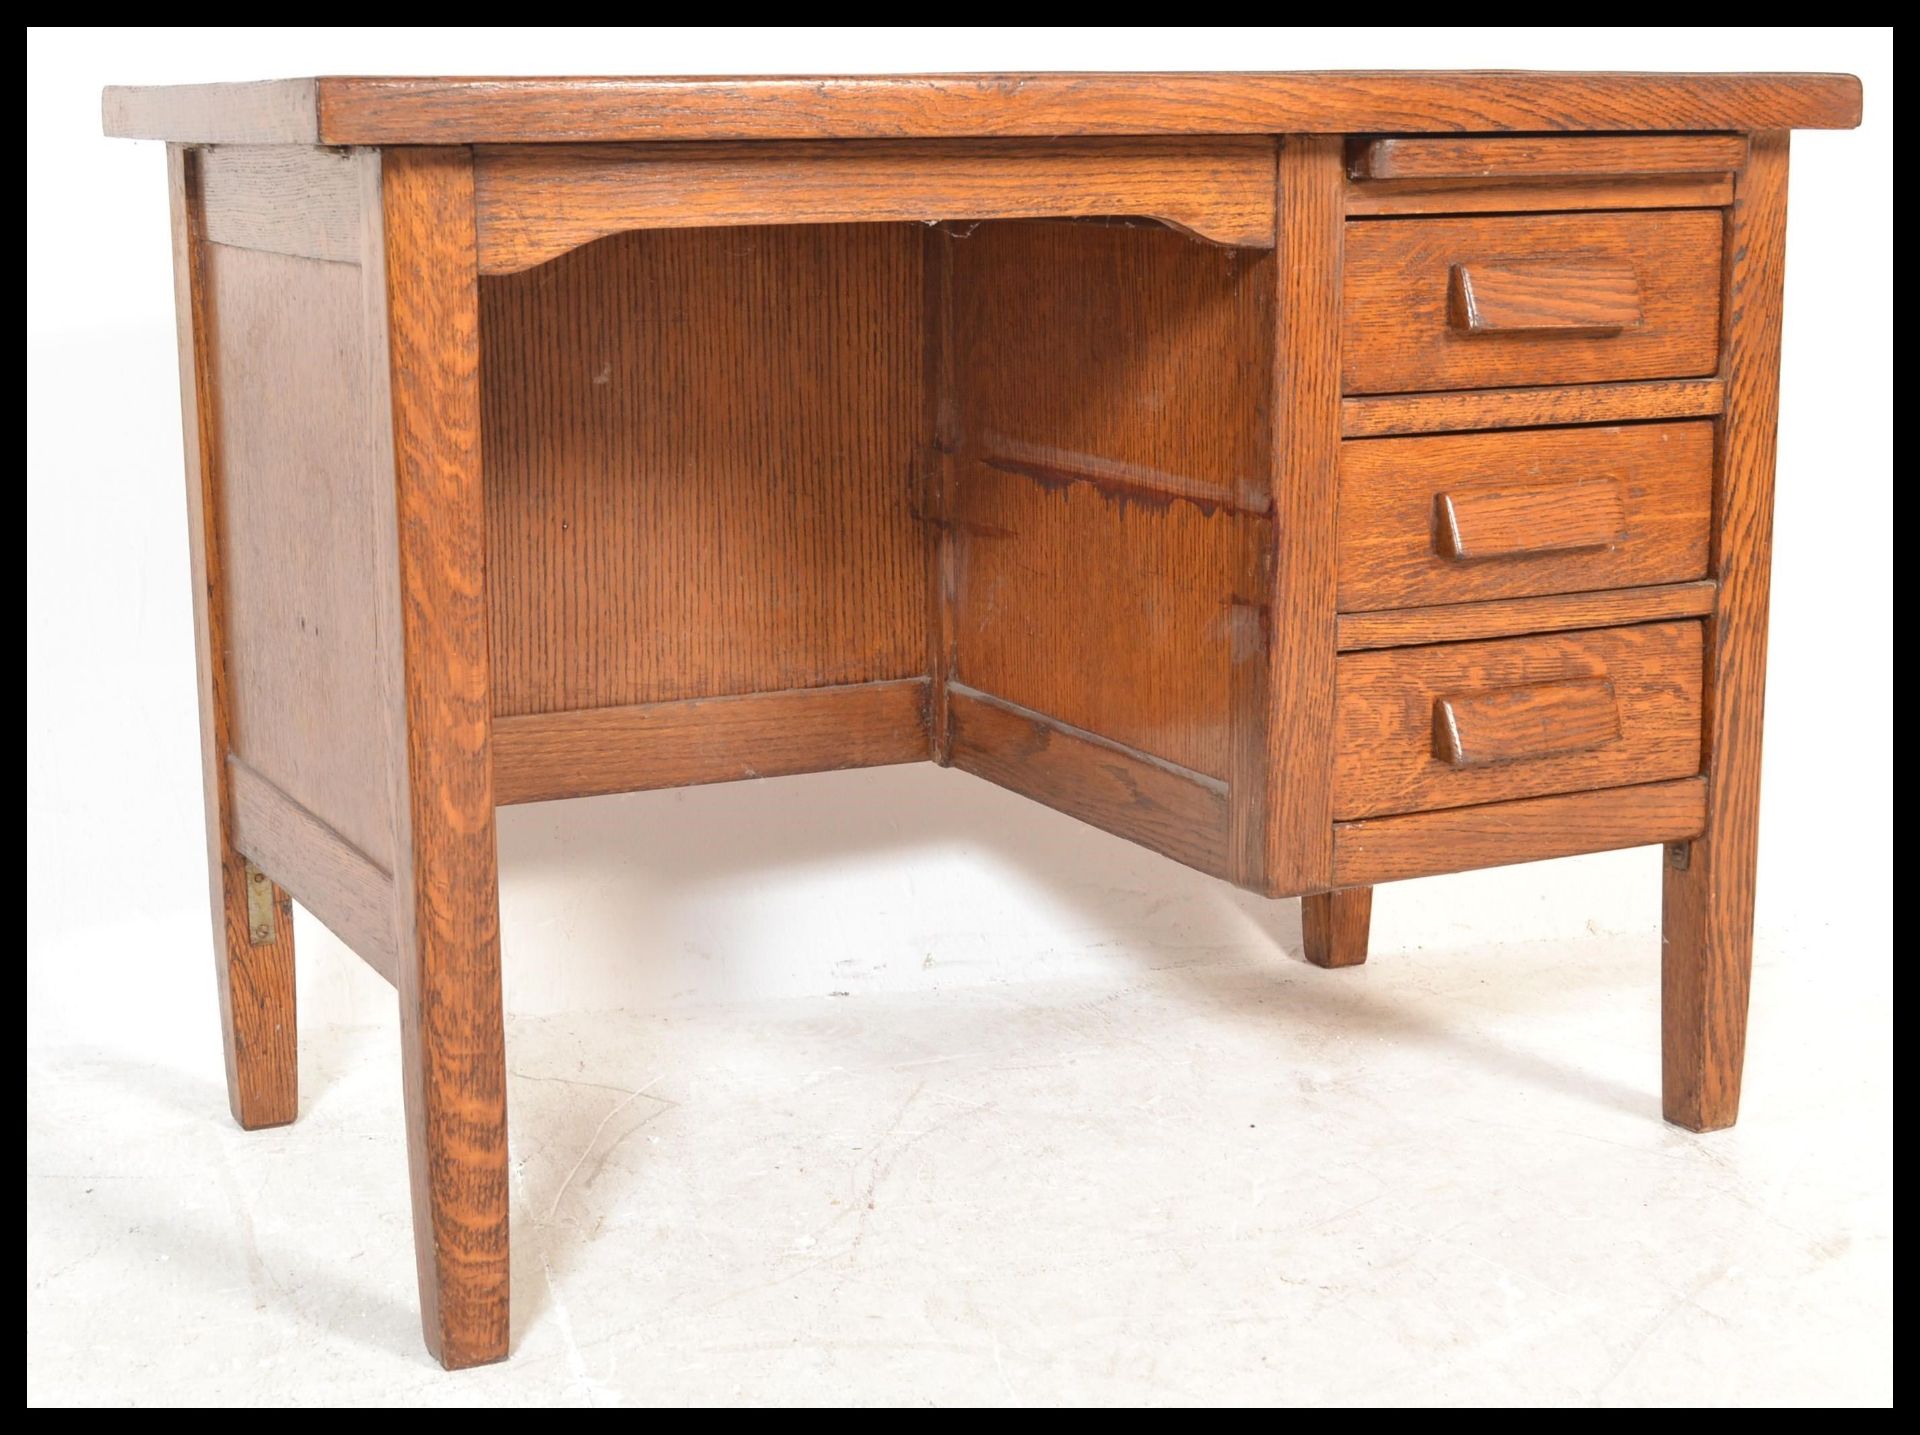 A small early 20th century oak single pedestal desk, having single pedestal with three drawers and